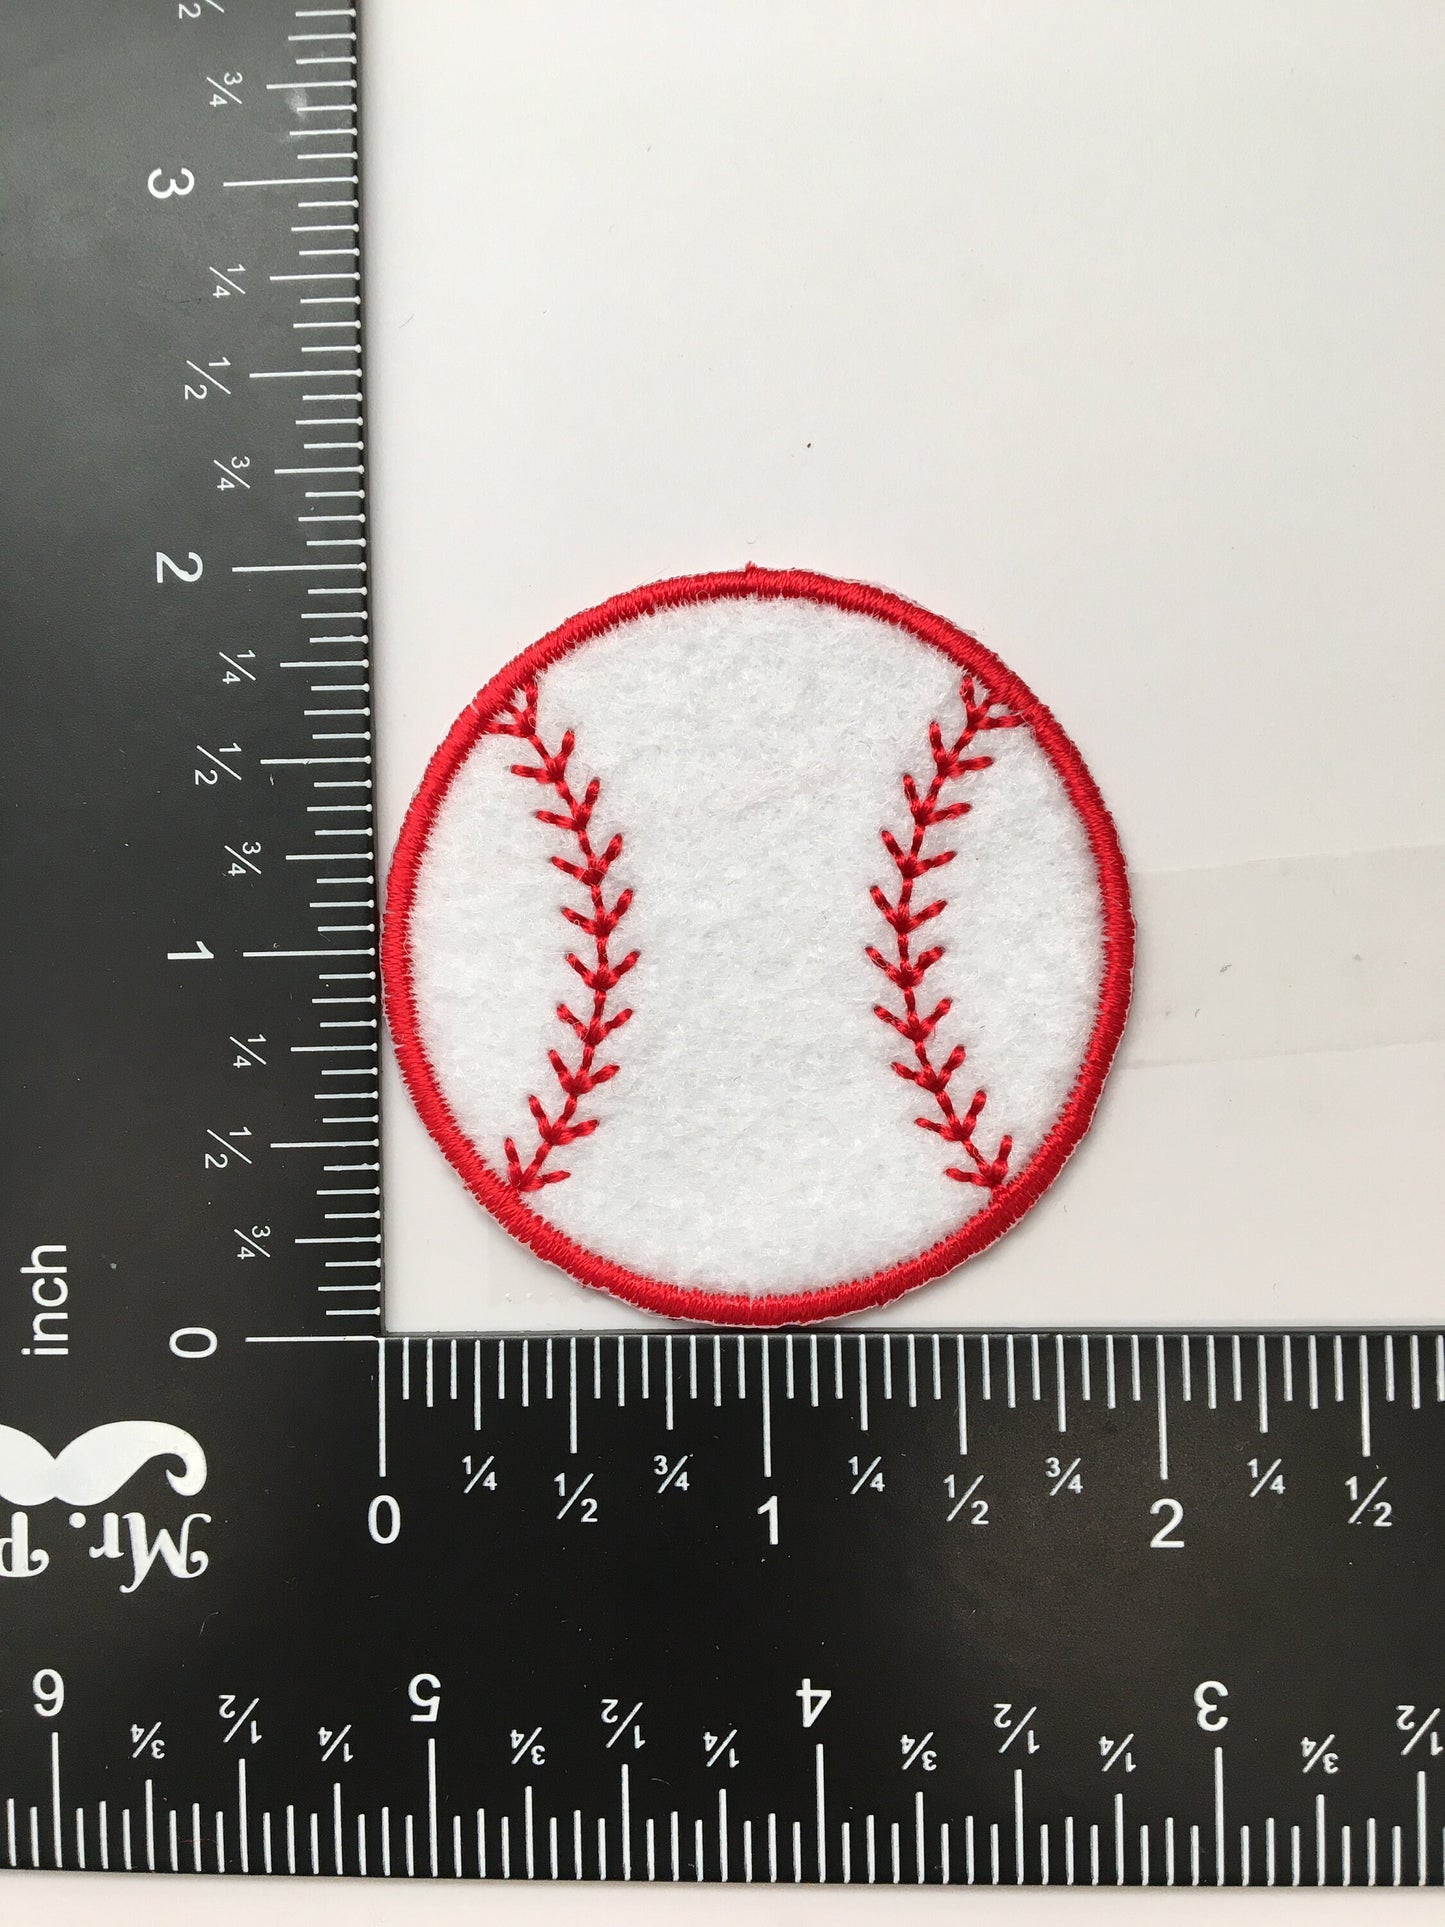 Baseball - Felt - Sports Ball - Embroidered Patch - Iron on Applique - 694573B